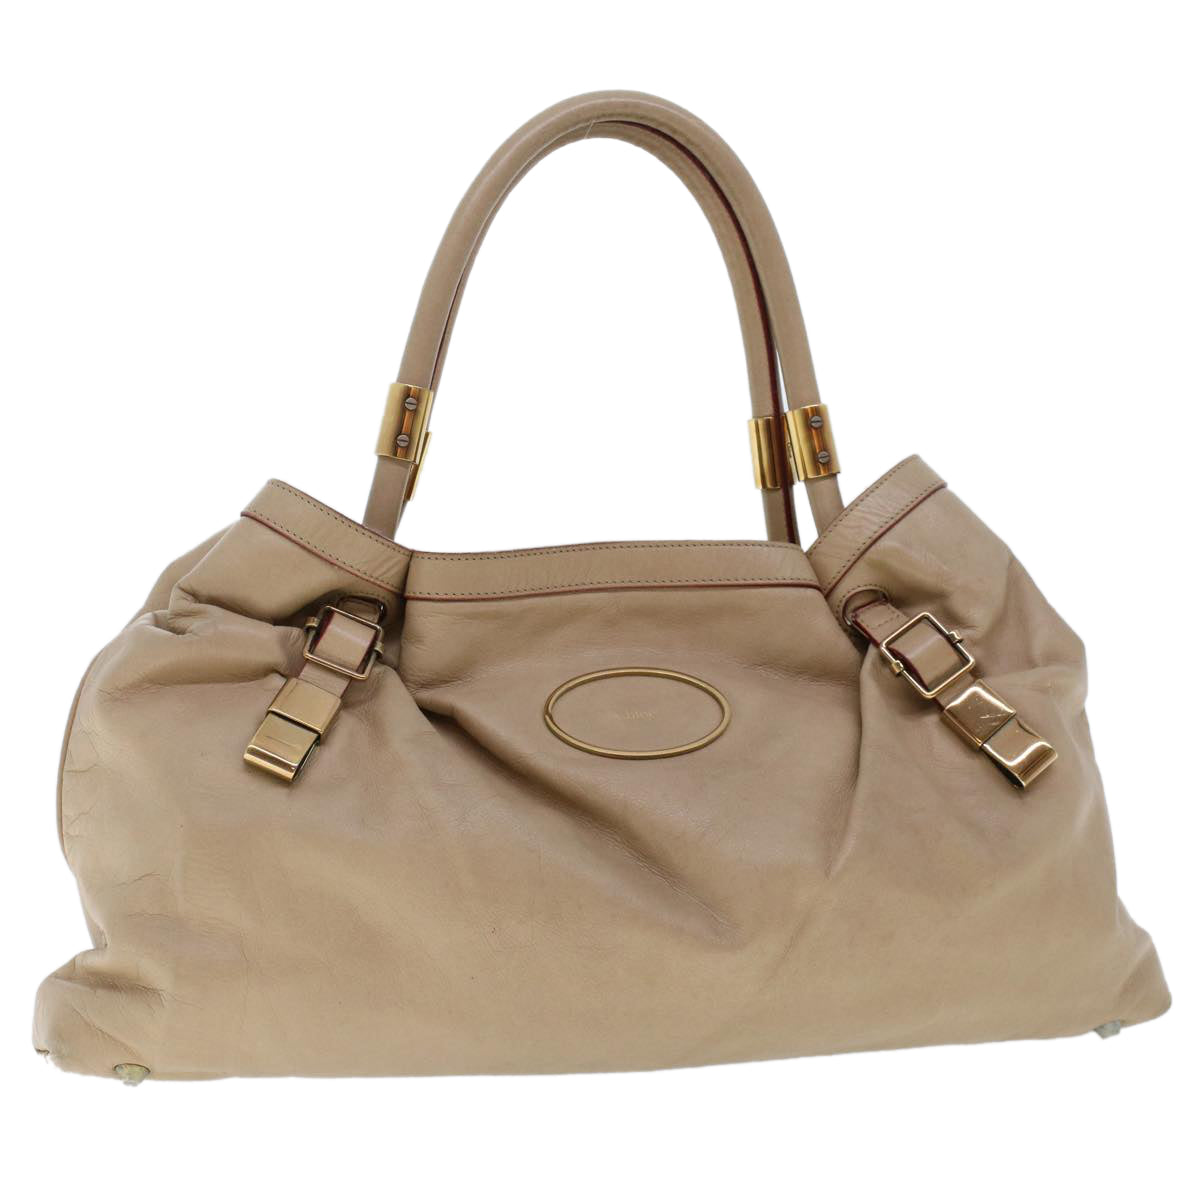 Chloe Victoria Hand Bag Leather Beige Auth bs6433